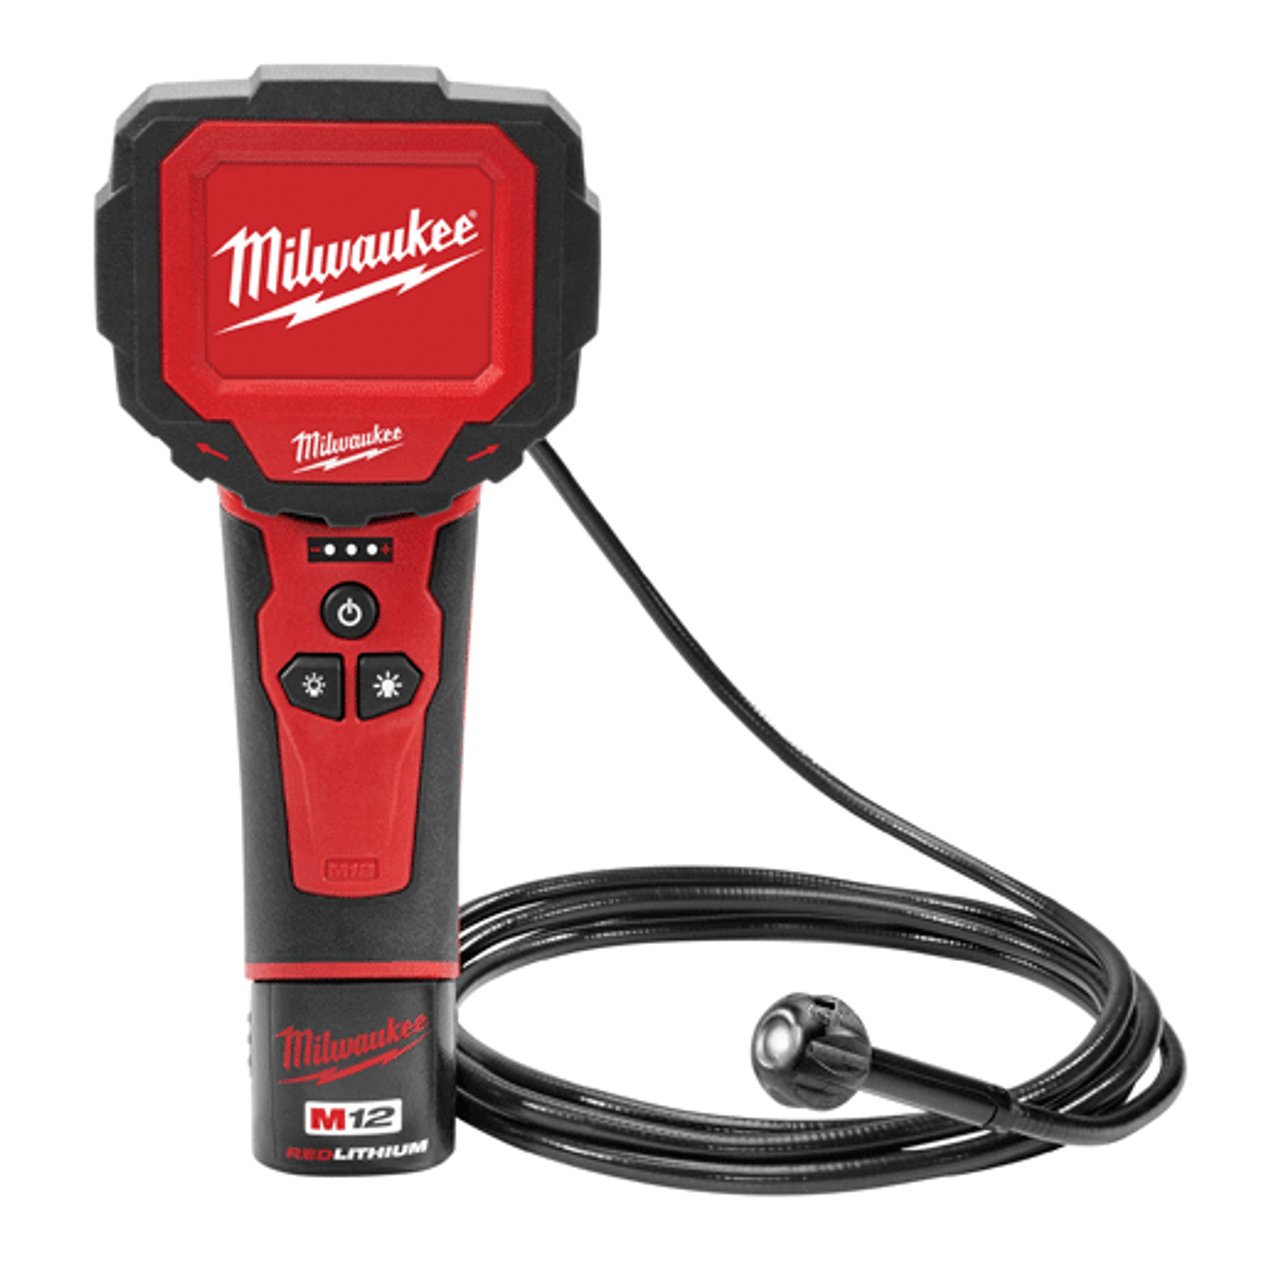 Milwaukee 2316-21 M12 M-Spector Flex 9 Ft Inspection Camera Cable Kit